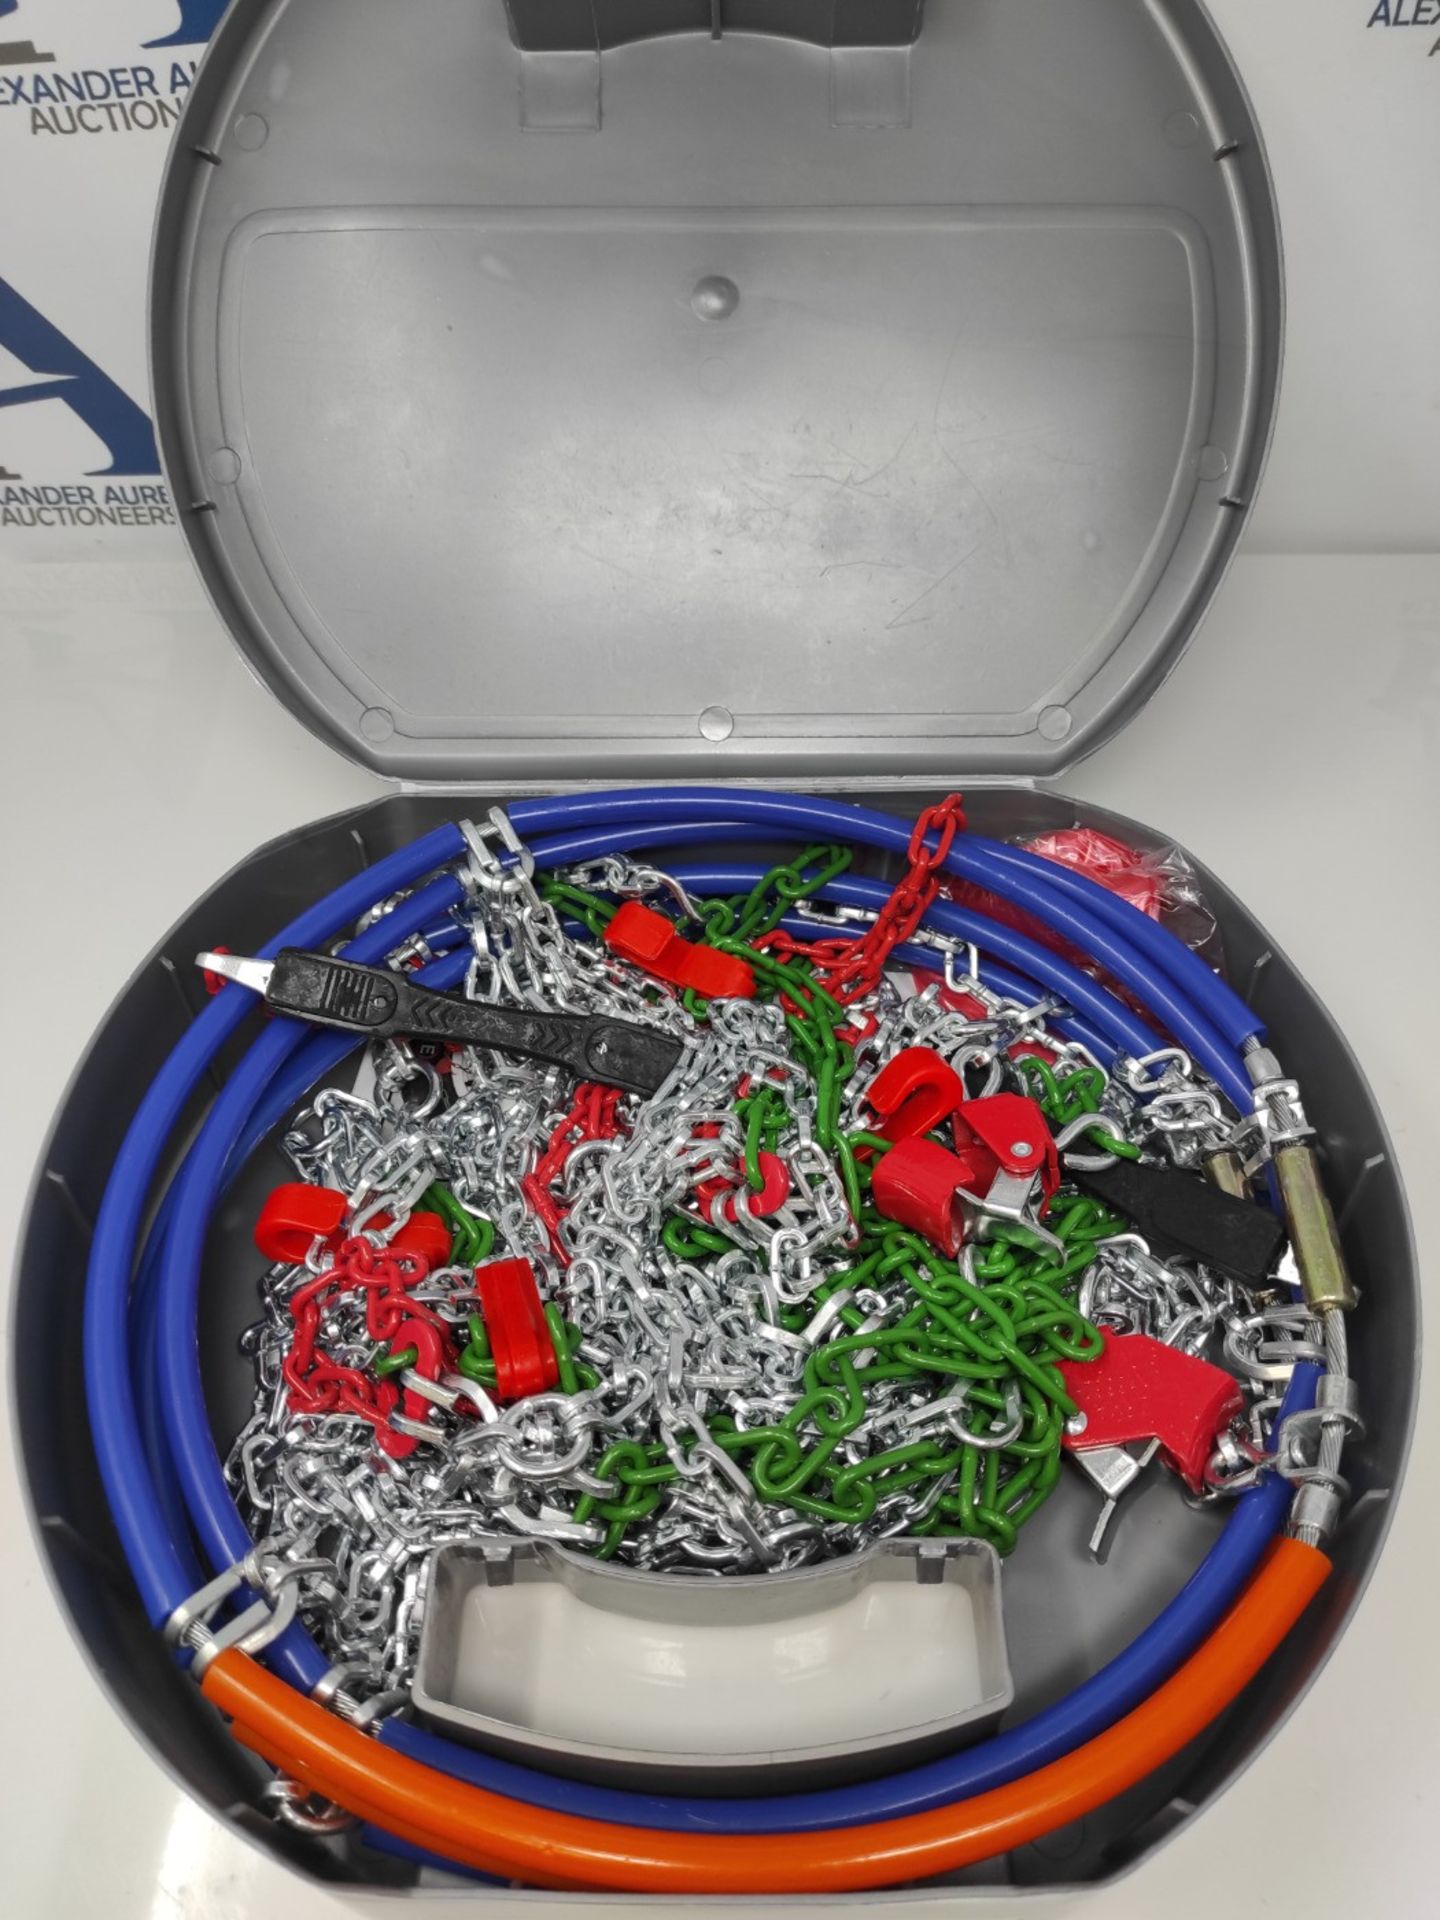 RD9 - Metal snow chains, mm, size No. 90, 2 pieces, including gloves. - Image 3 of 3